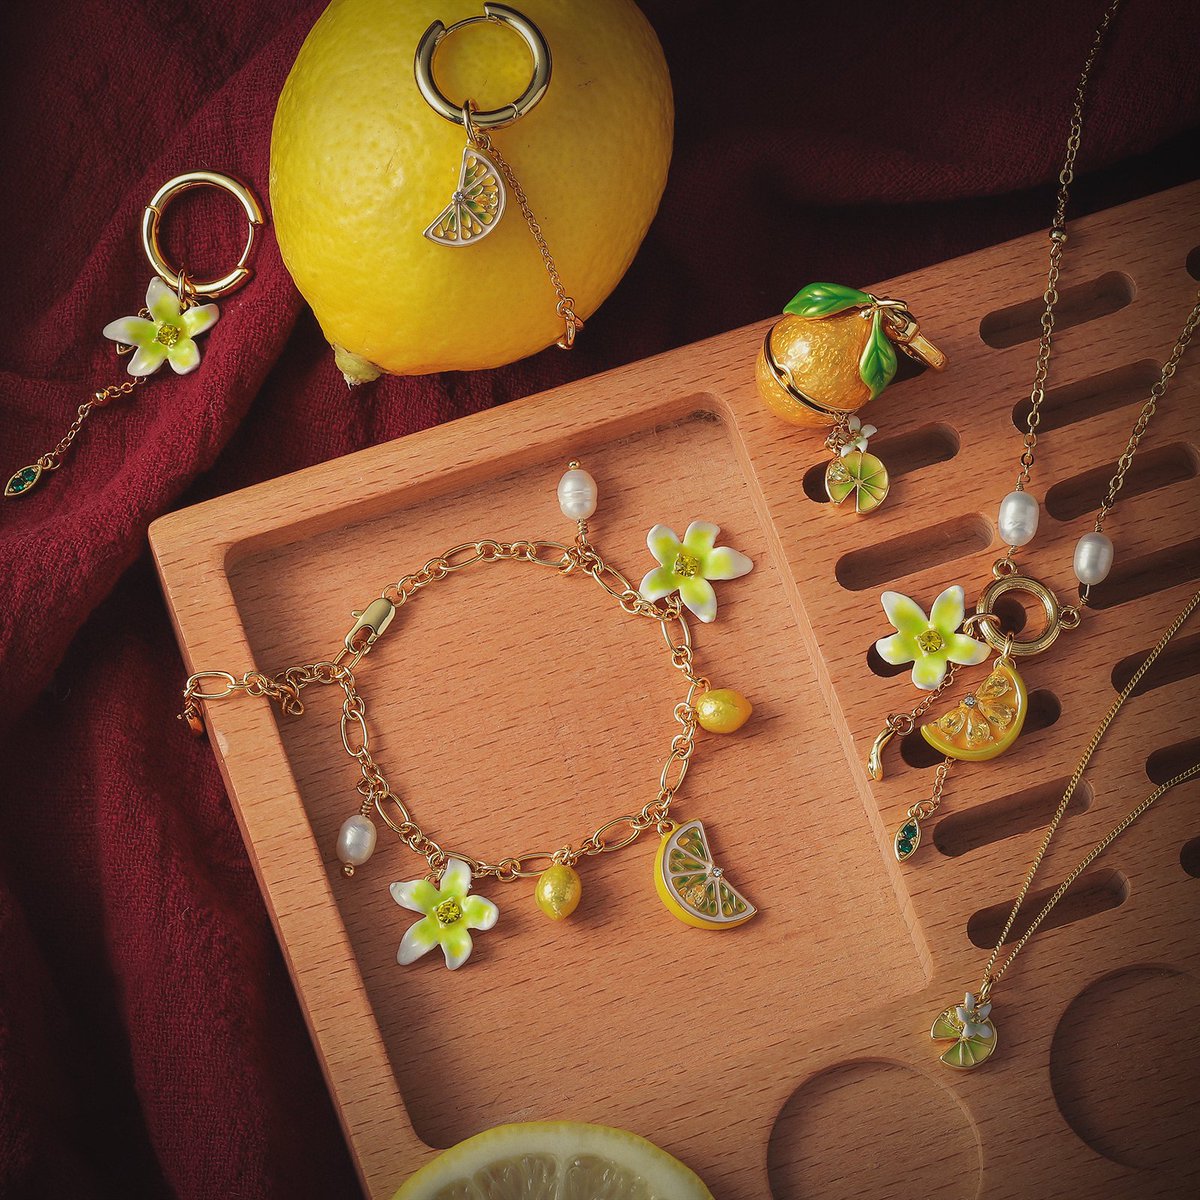 Do you like lemons? If you do, come to join our Lemon Club. Wearing these accessories will make you feel different about yourself.😆💖🍋

Shop in the link🔗selenichast.com/collections/le…
#selenichast #selenichastjewel #lemonflowernecklace #lemonbracelet  #lemonearrings #locketnecklace